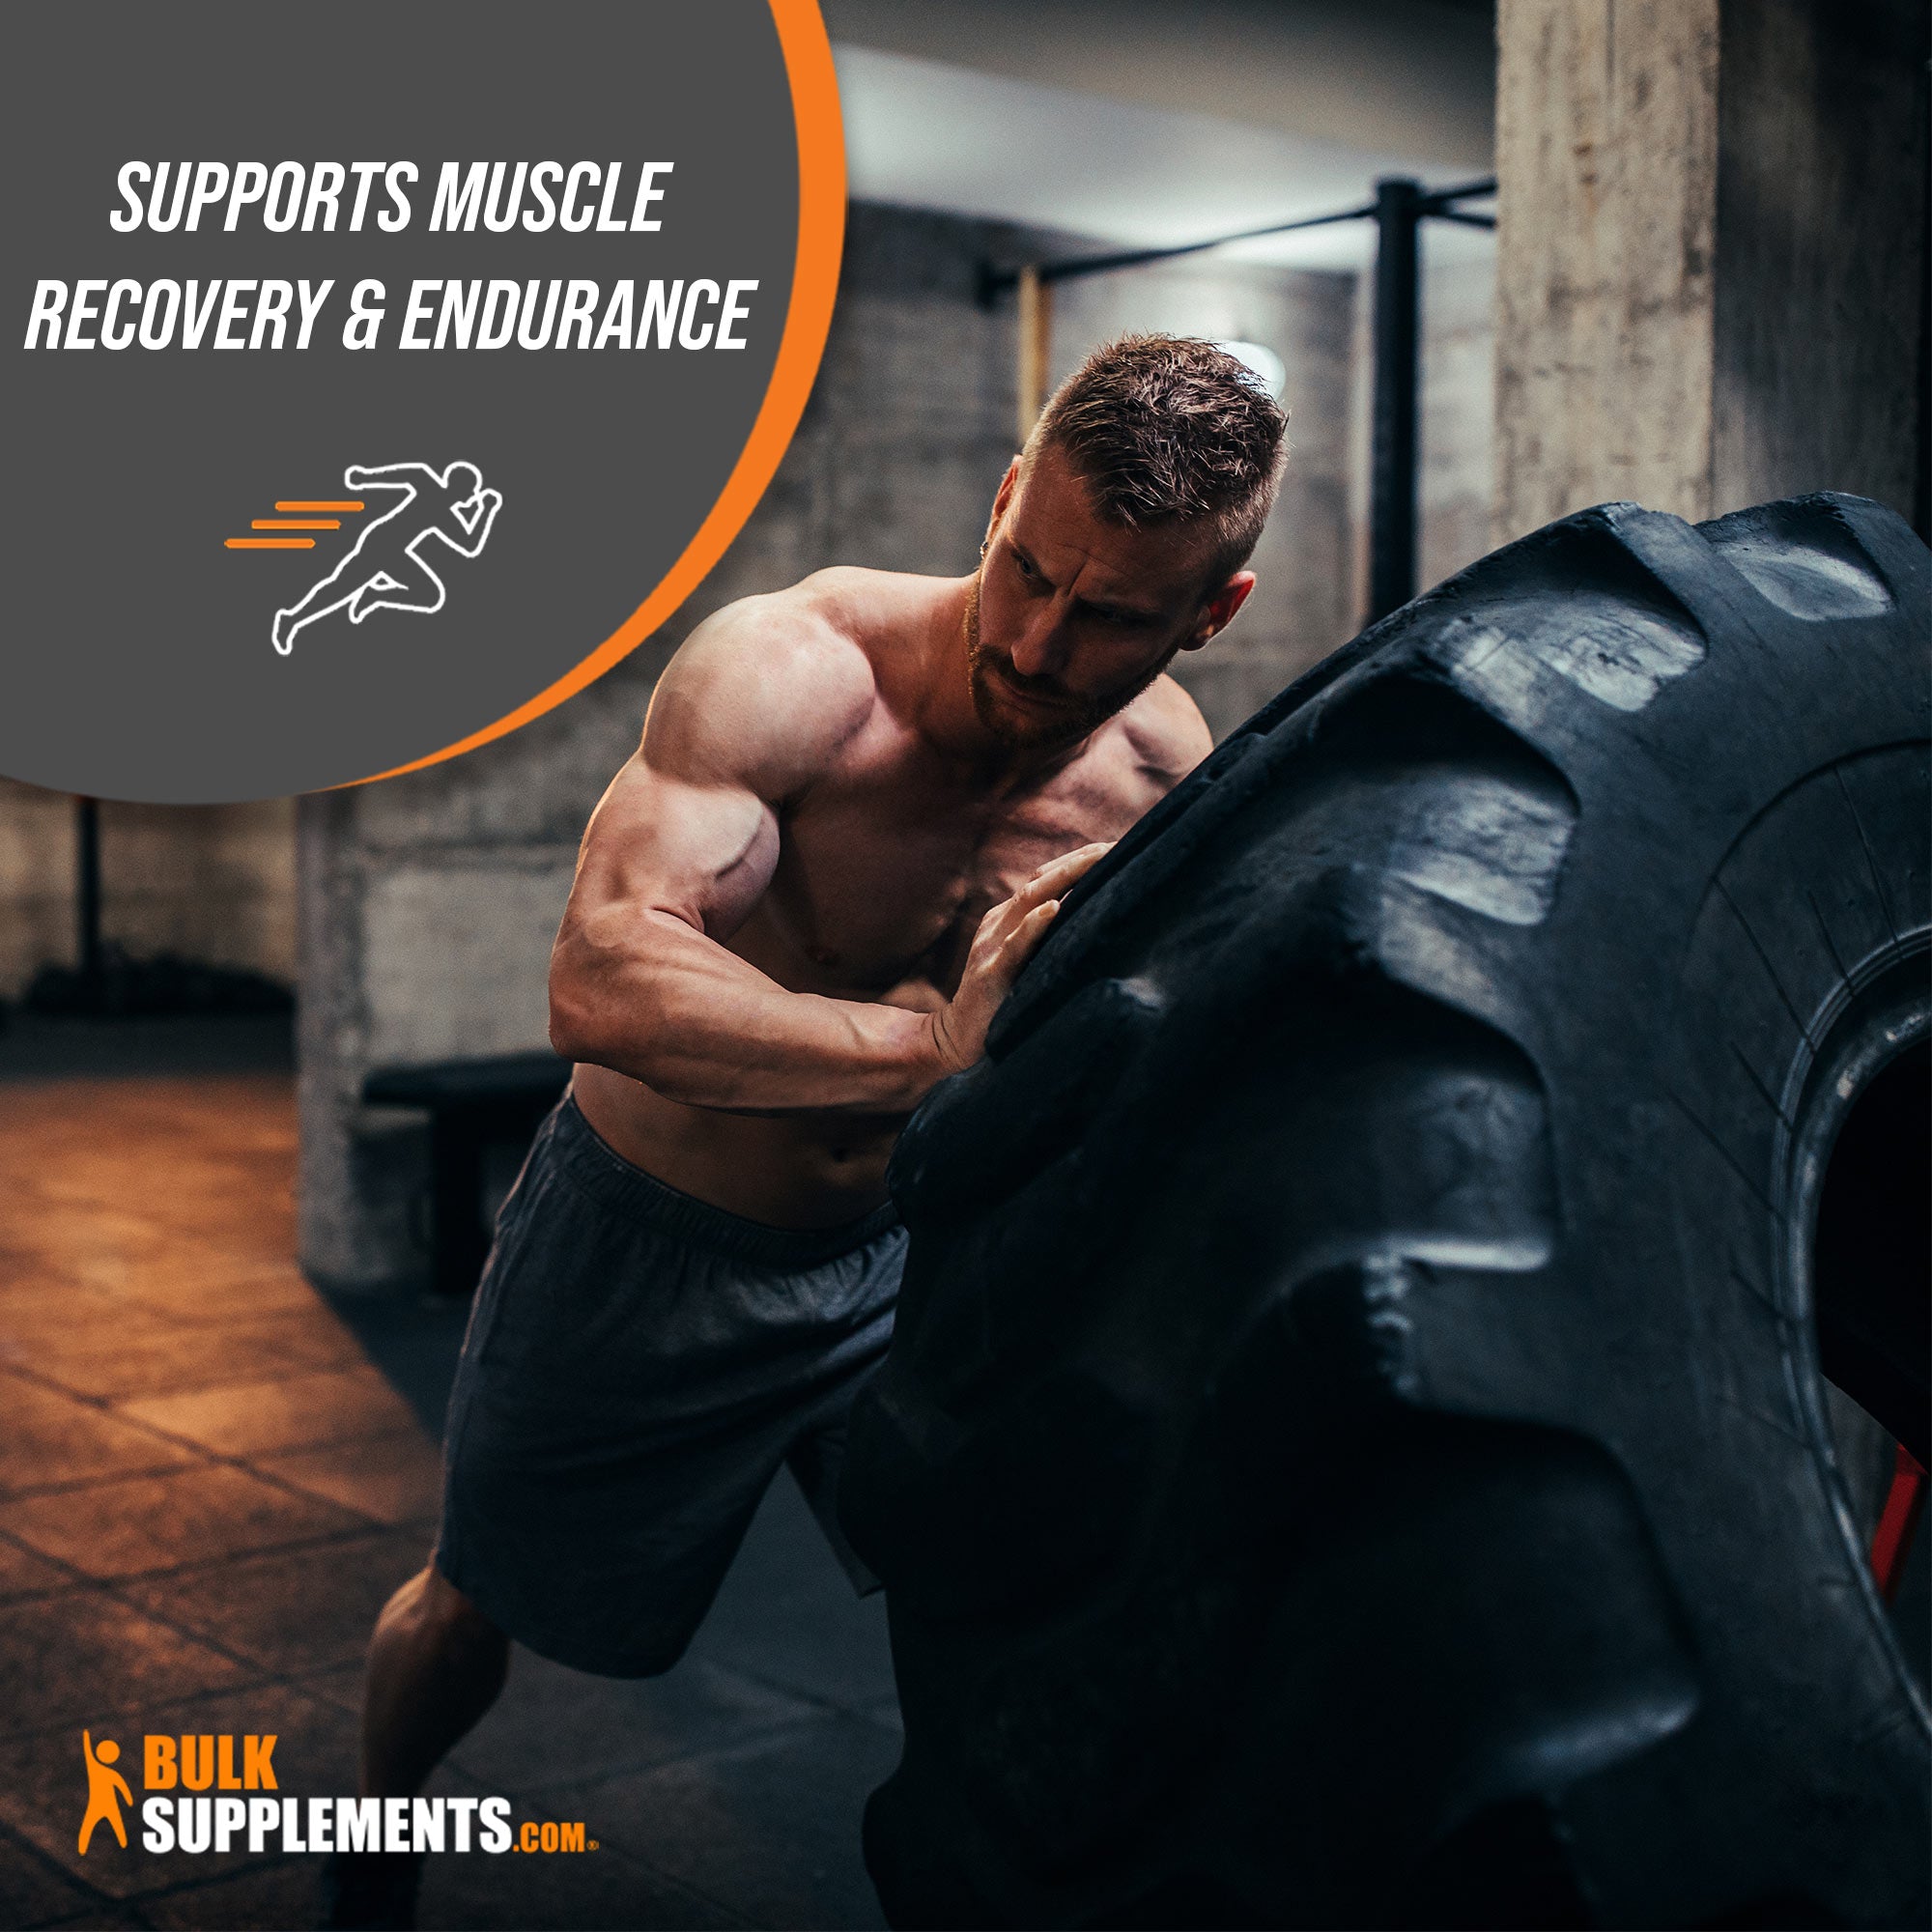 L-Isoleucine Powder Muscle Recovery And Endurance Post workout powder